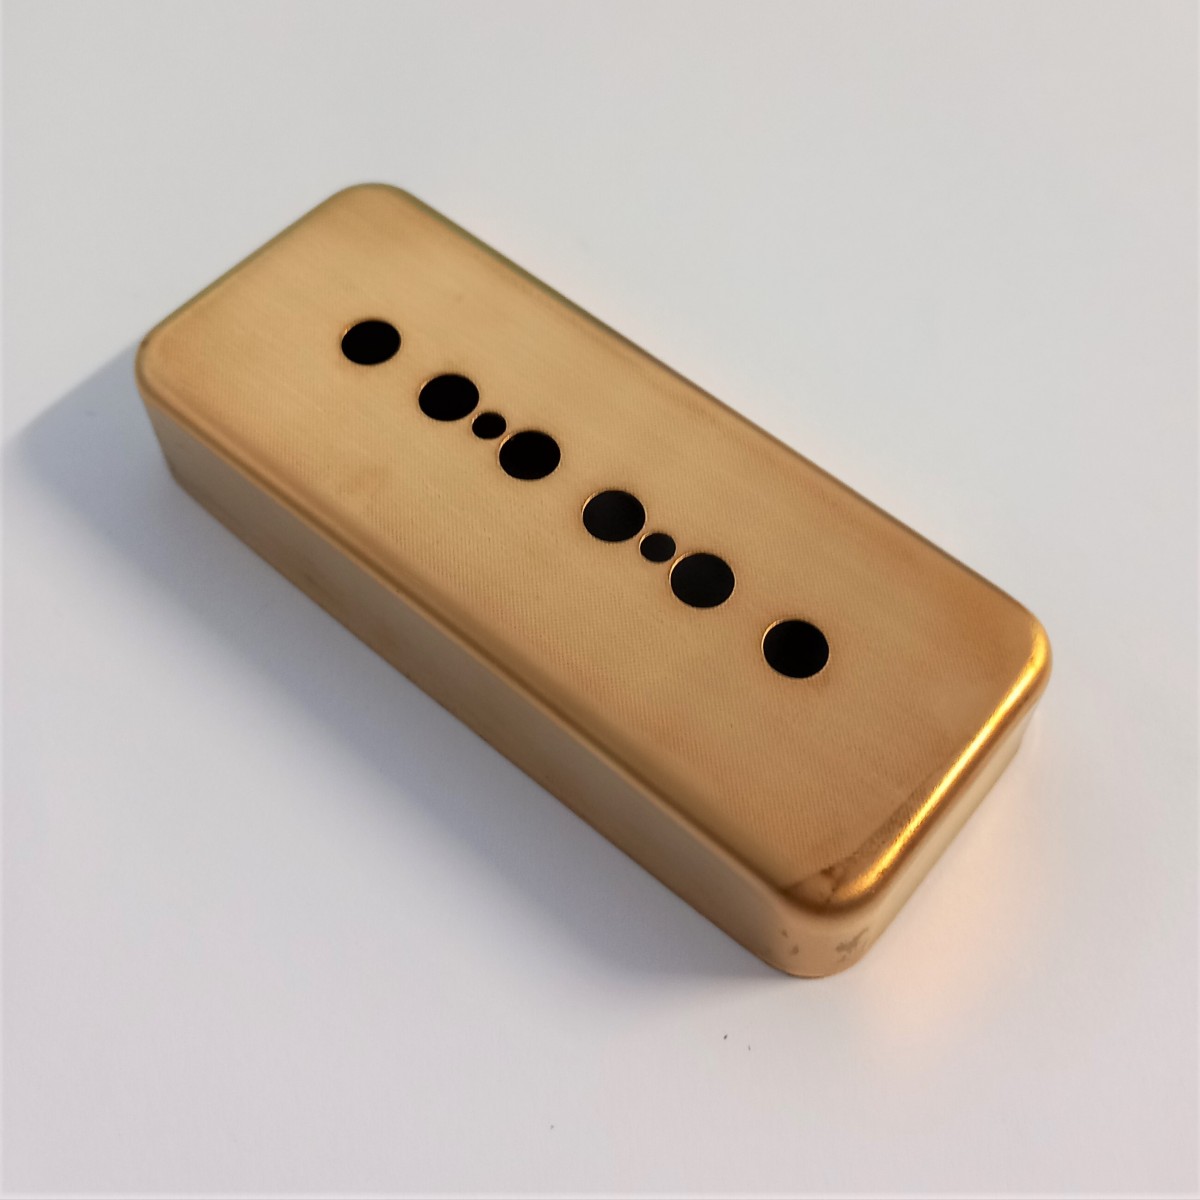 P90 PICK UP BRASS COVER UNPLATED